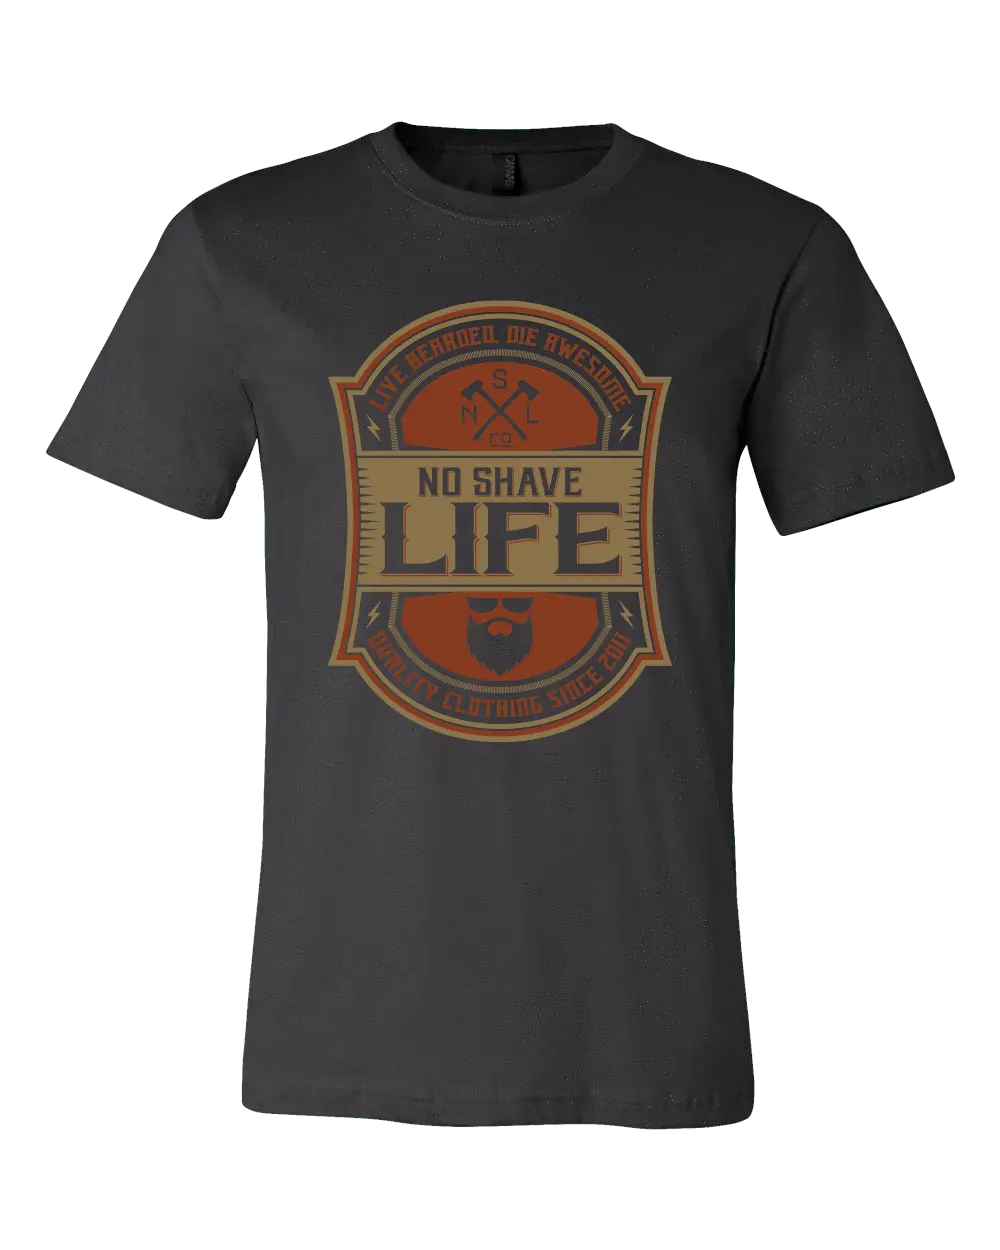 Live Bearded Die Awesome Black T-Shirt|T-Shirt